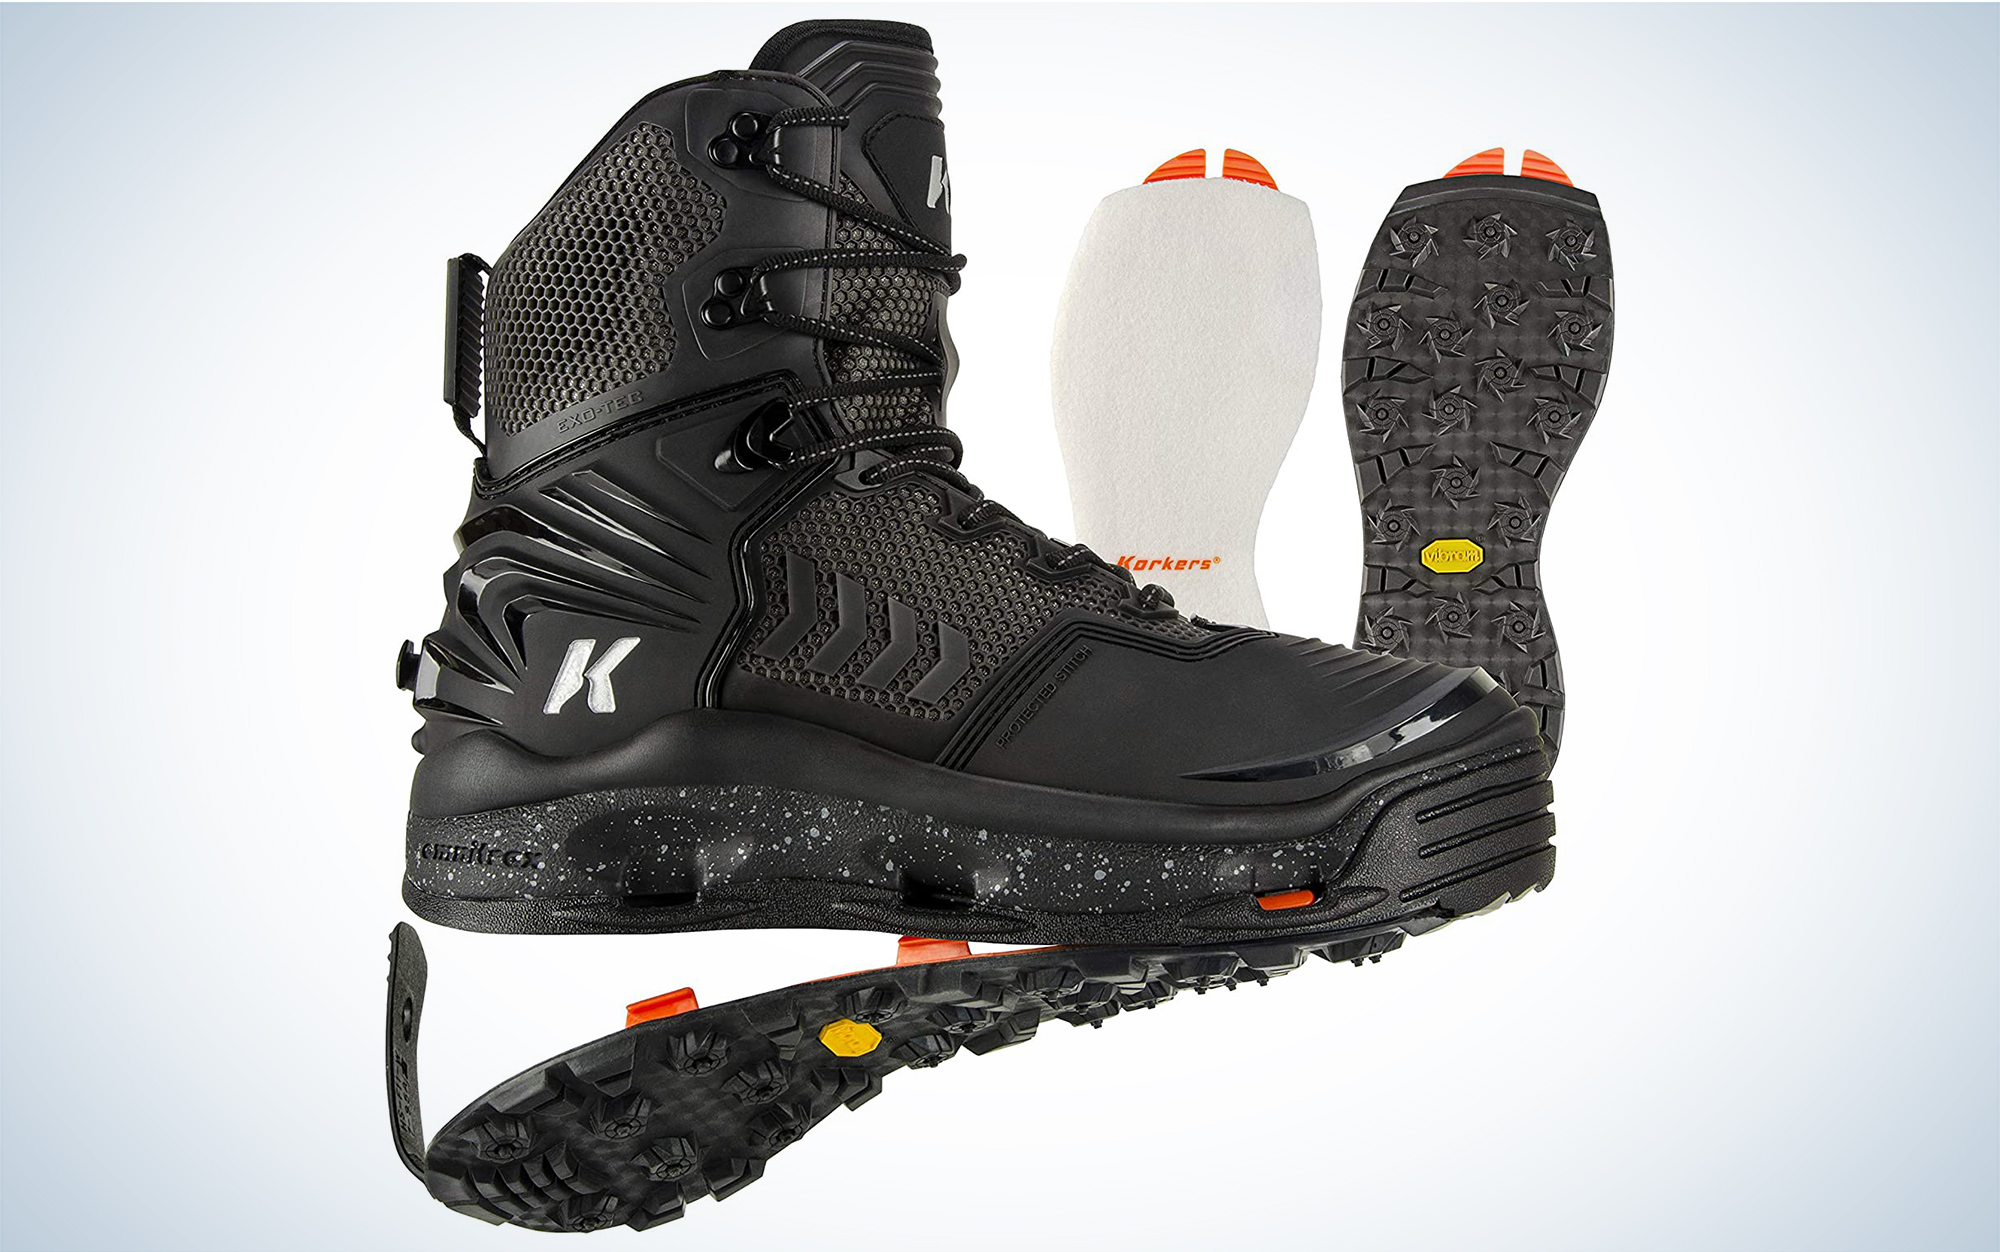 The Korker River Ops BOA wading boots are the best for all conditions.